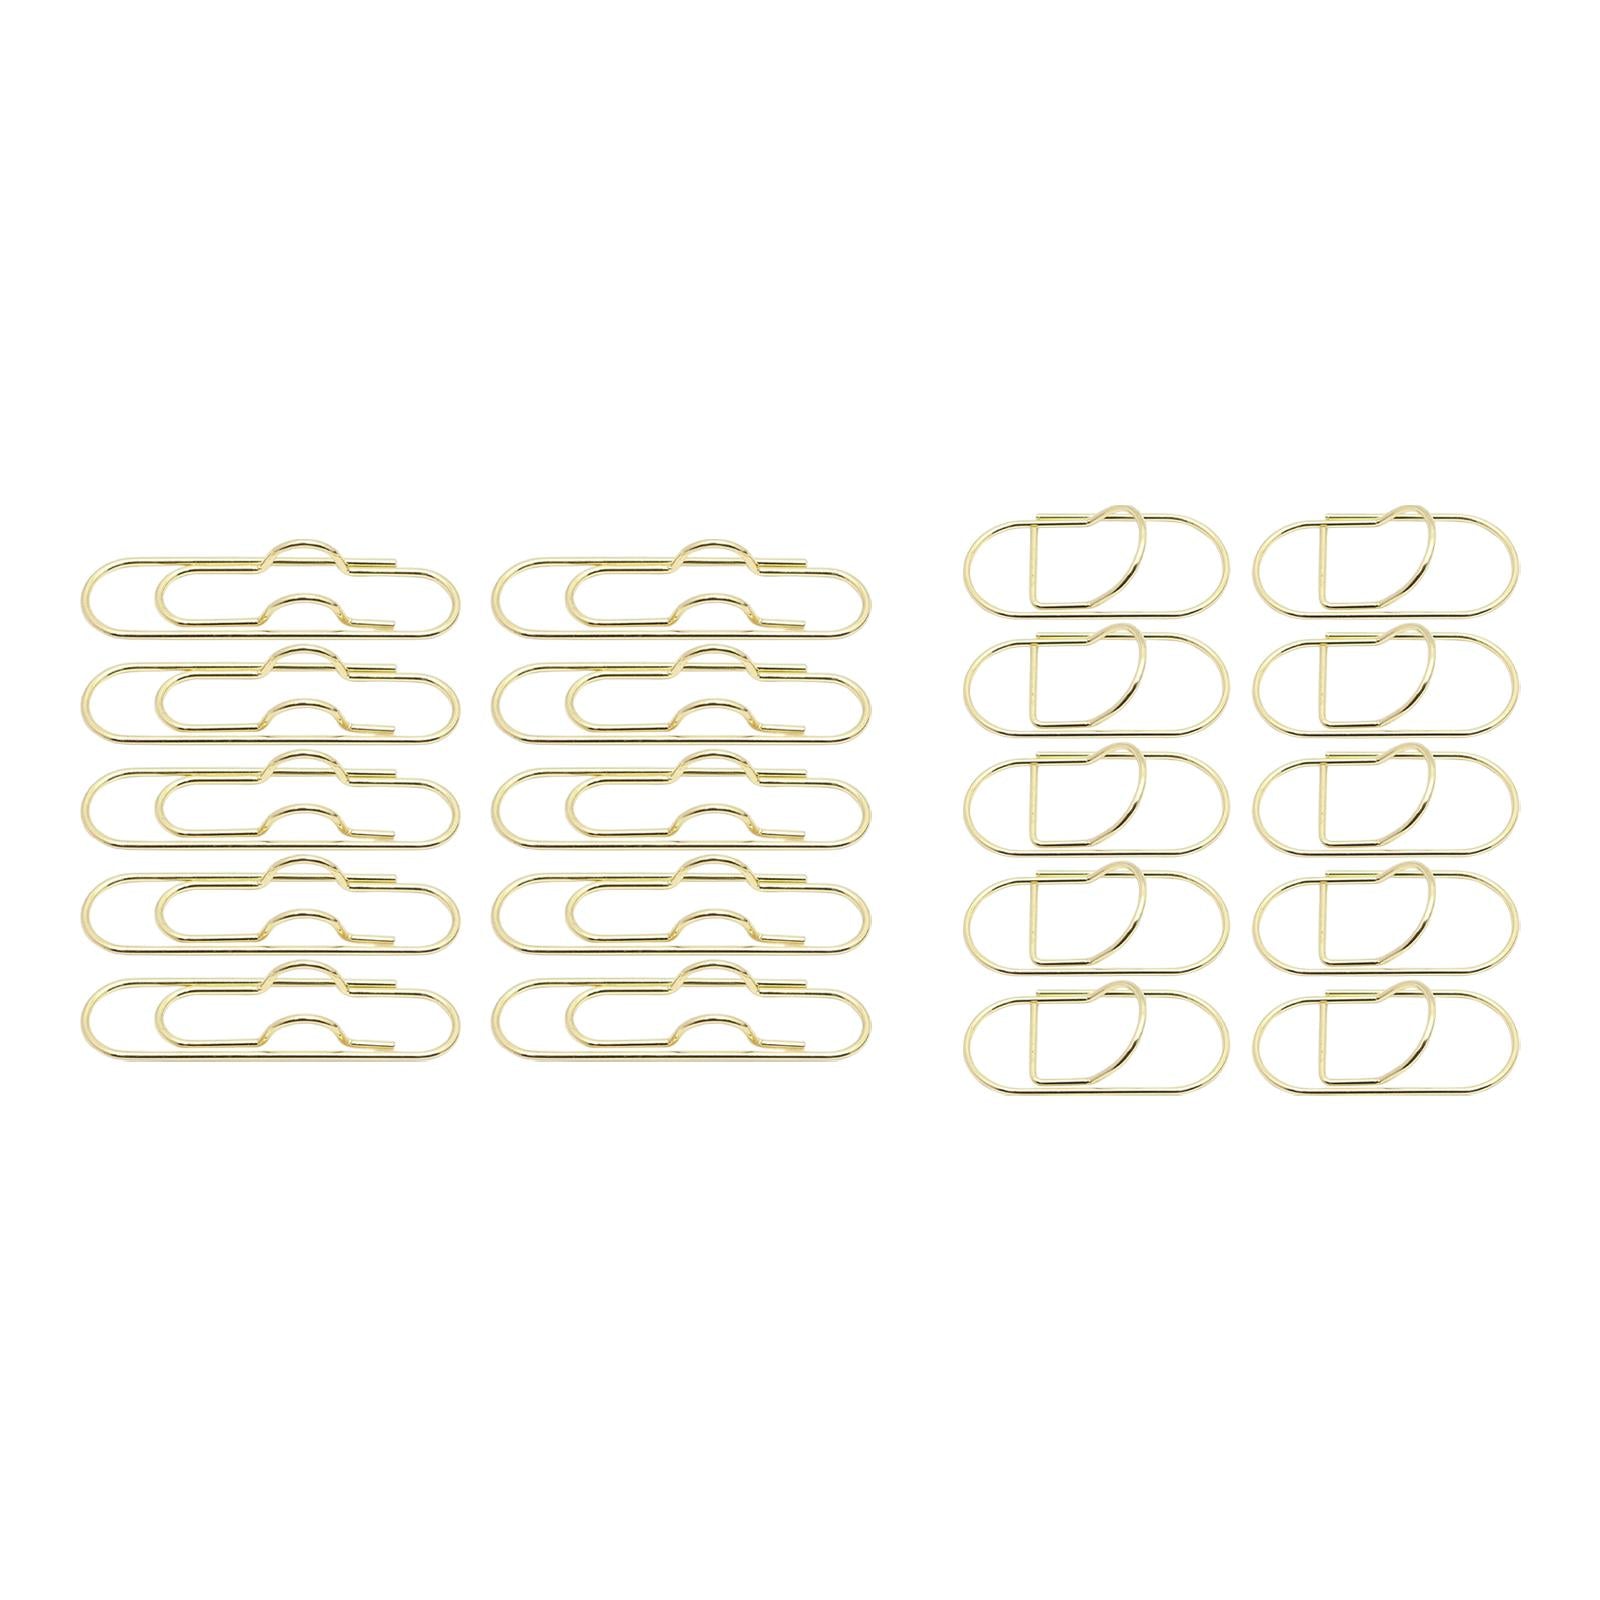 10x Paper Clips Metal Pen holder Portable for Graduation Birthday 19mmx70mm